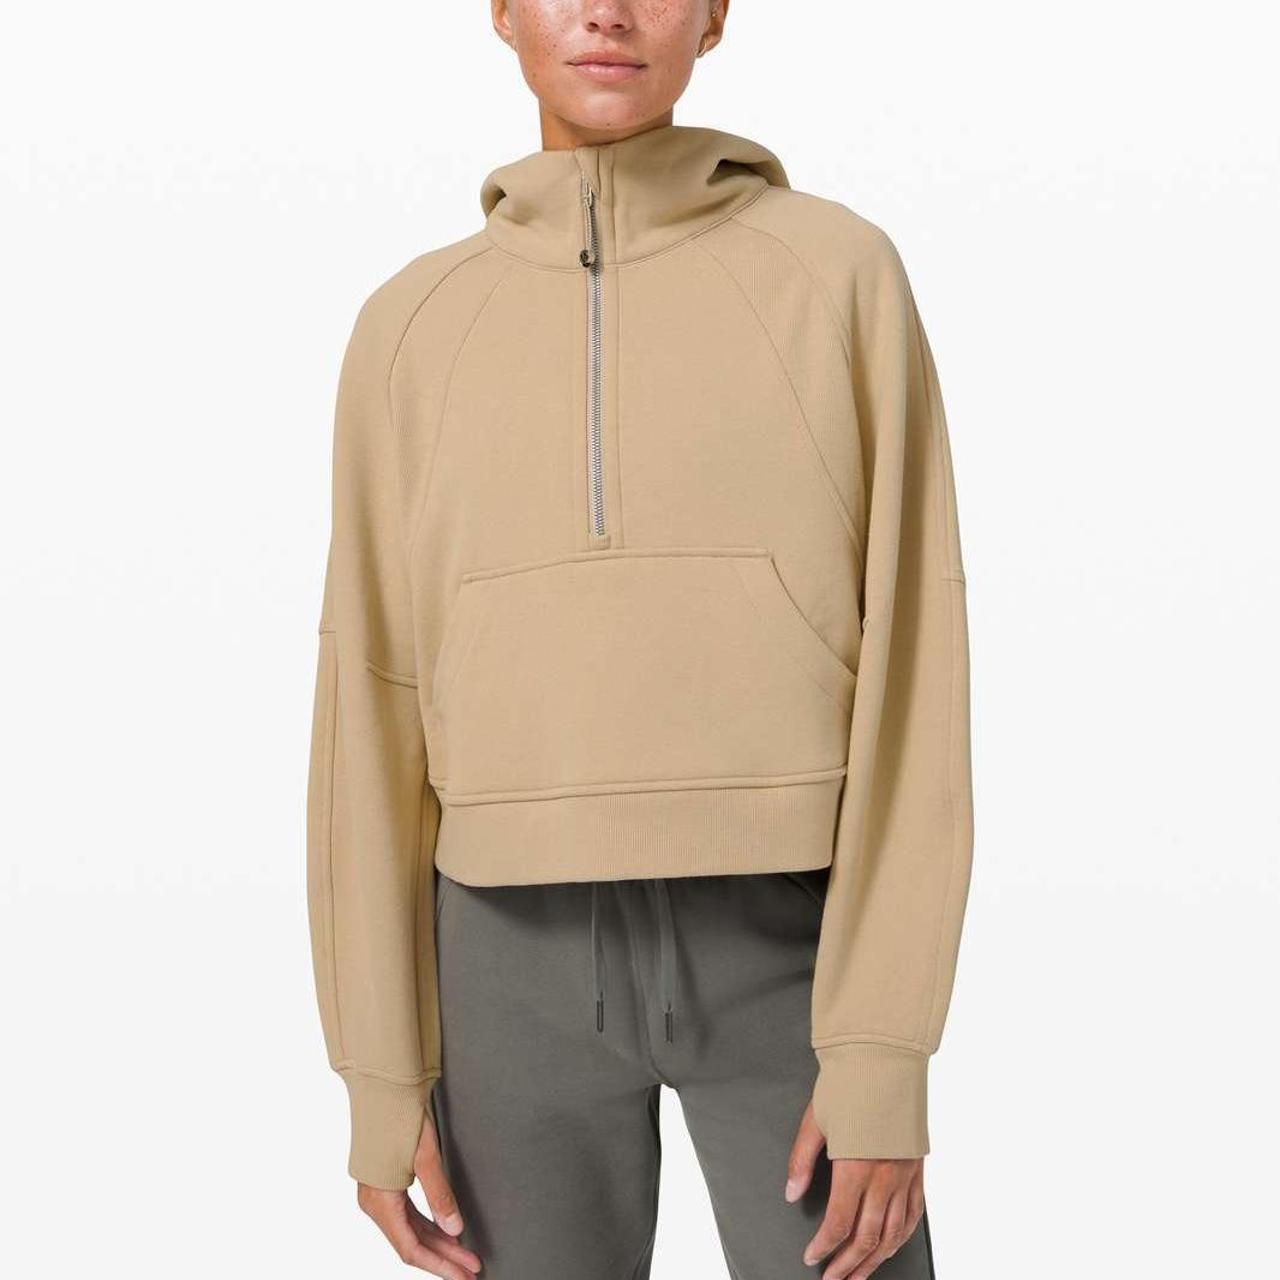 Best Size 10 Lululemon Scuba Hoodie for sale in Vancouver, British